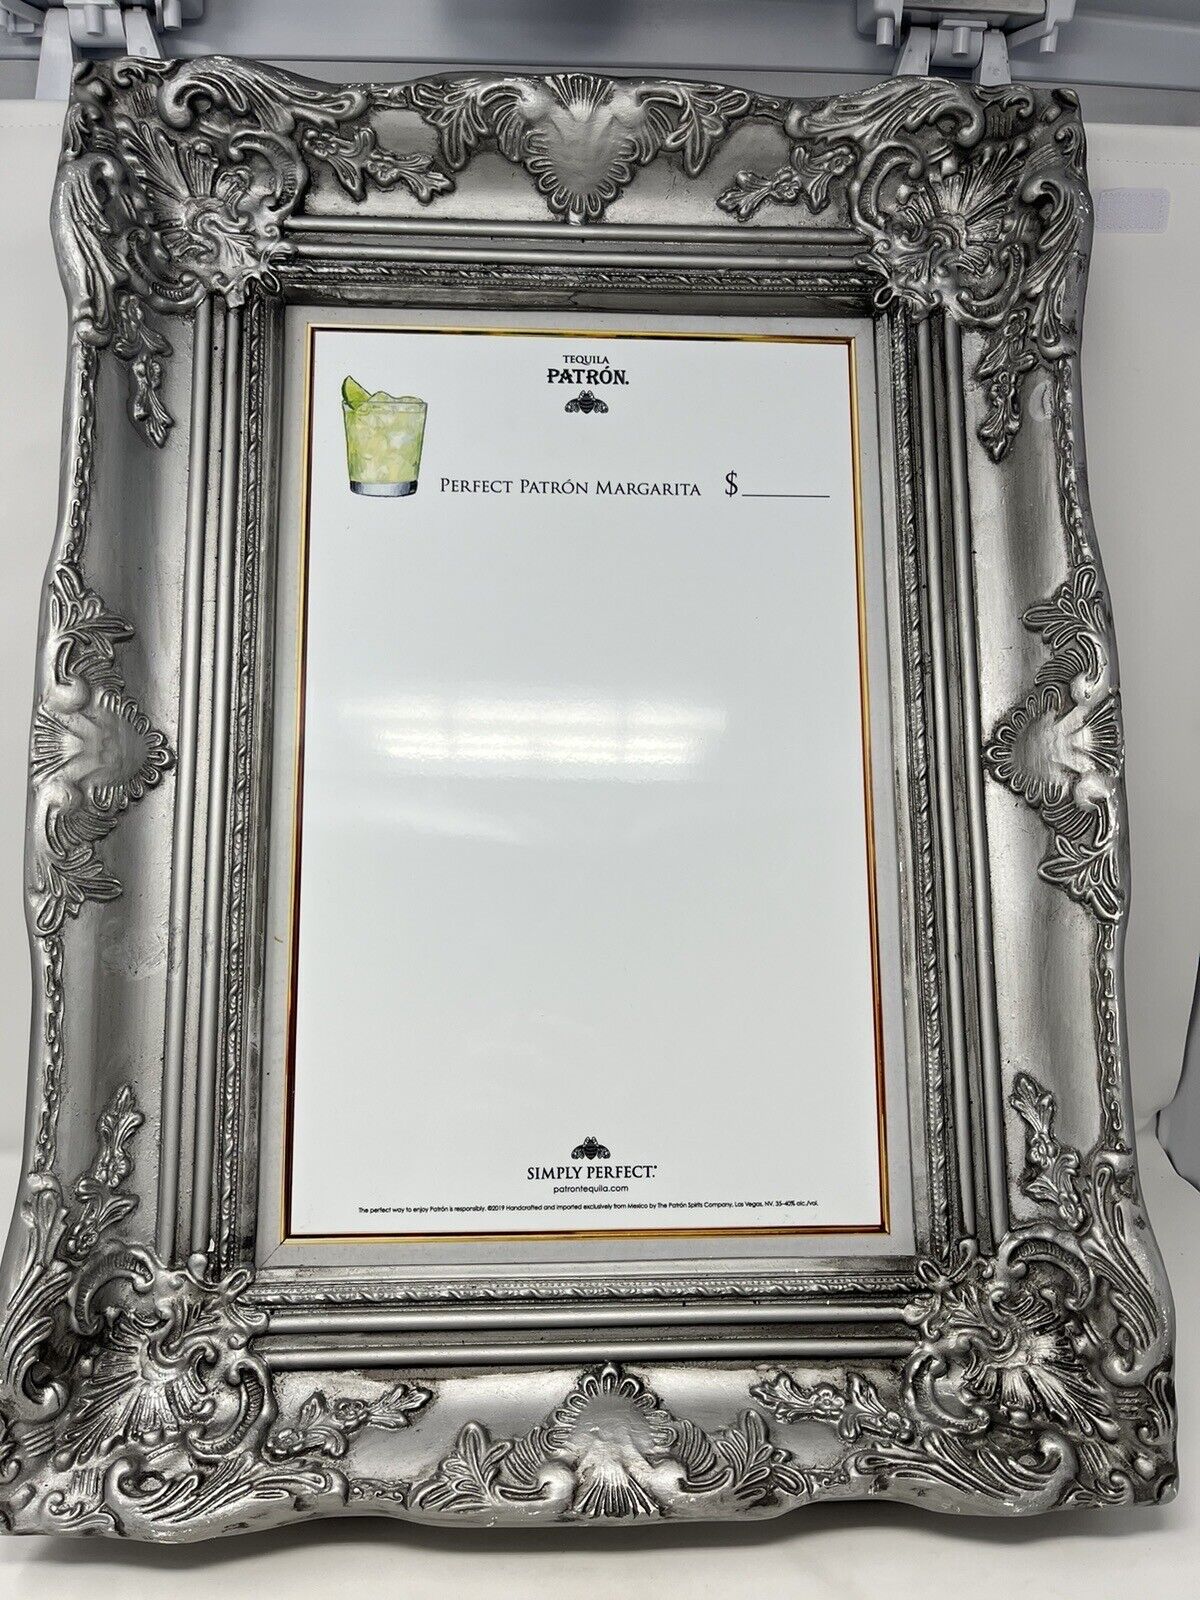 Patron tequila framed dry erase board. “simply perfect” margarita man cave 18x23